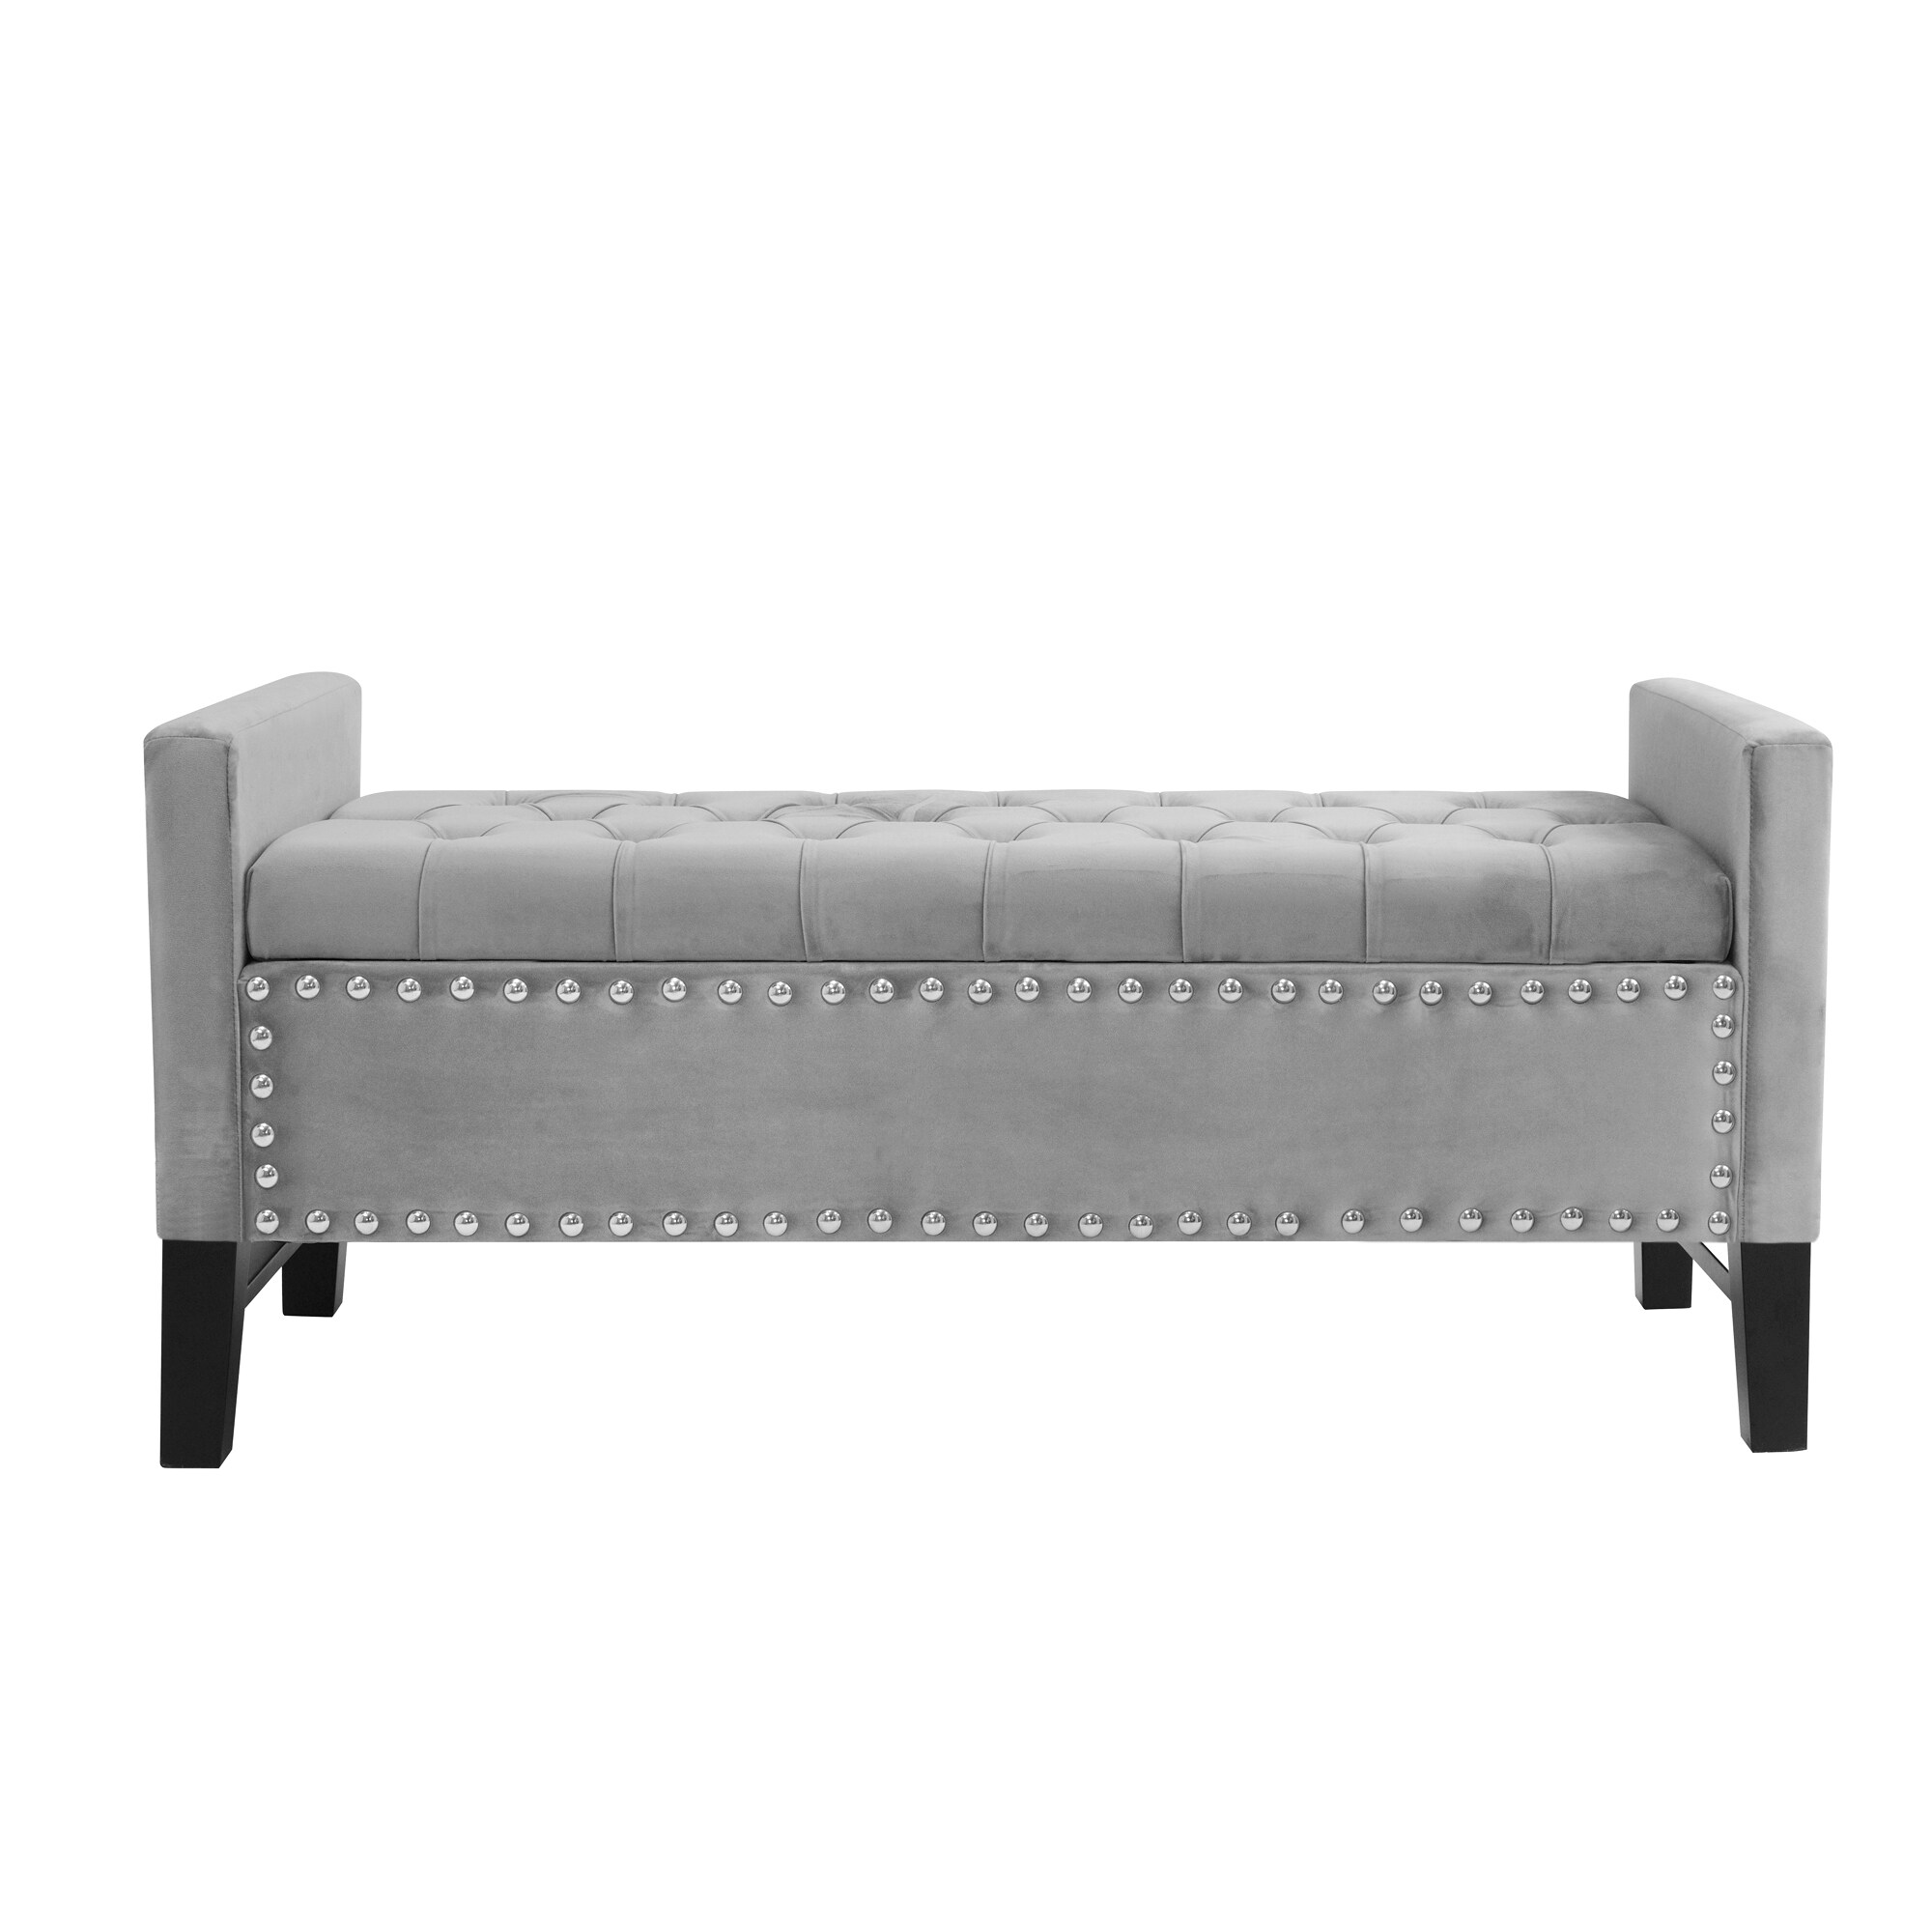 Emmaline Storage Grey at Inspired Light Bench Storage in Benches with department 50-in Modern x 22.05-in Home the